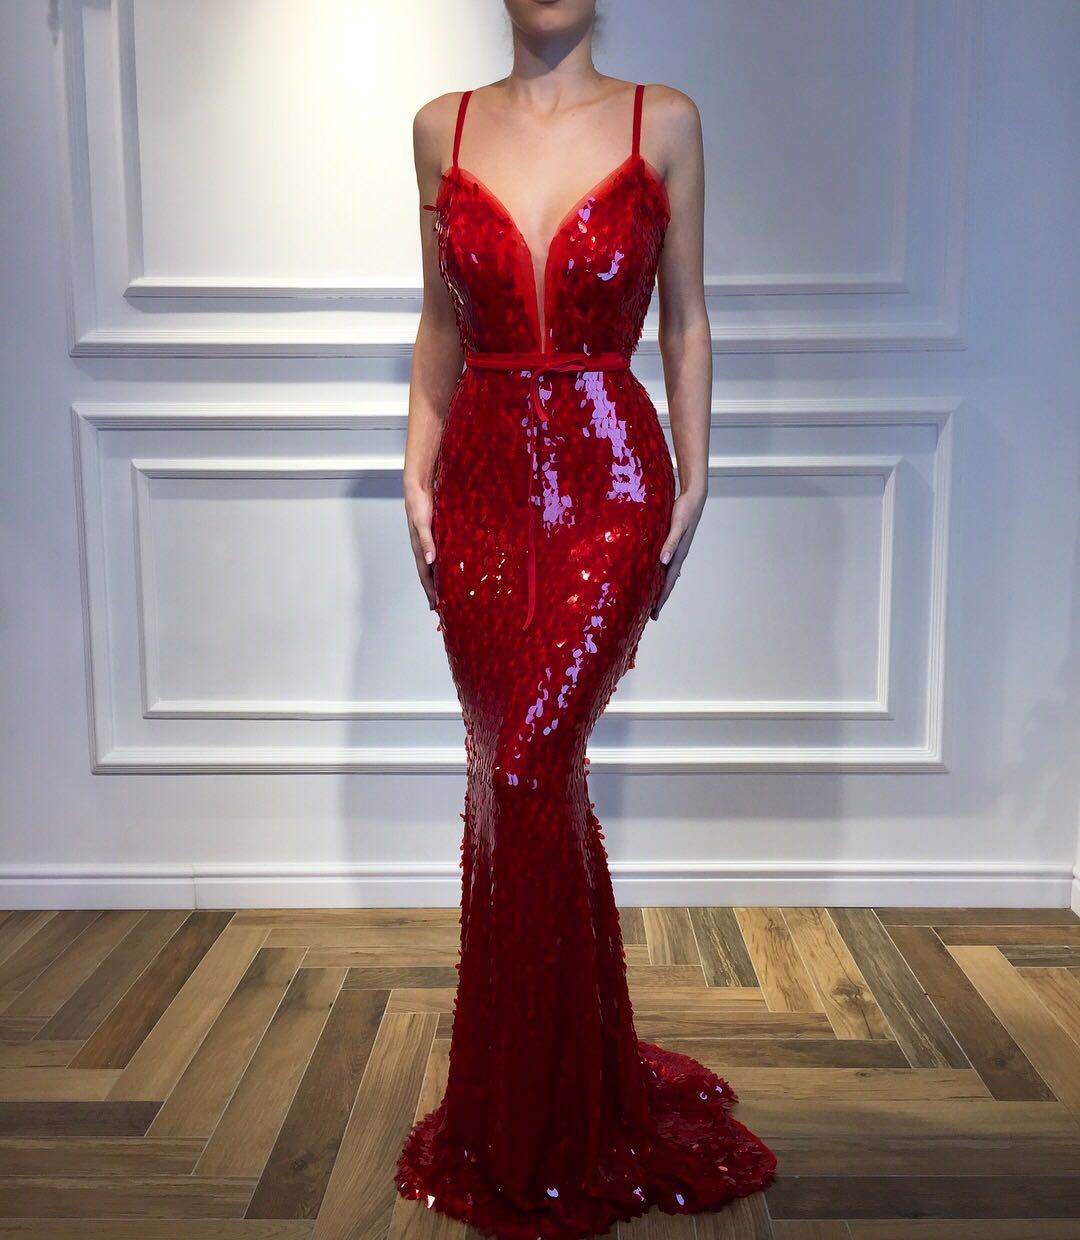 Red mermaid dress with spaghetti straps, v-neck and sequins